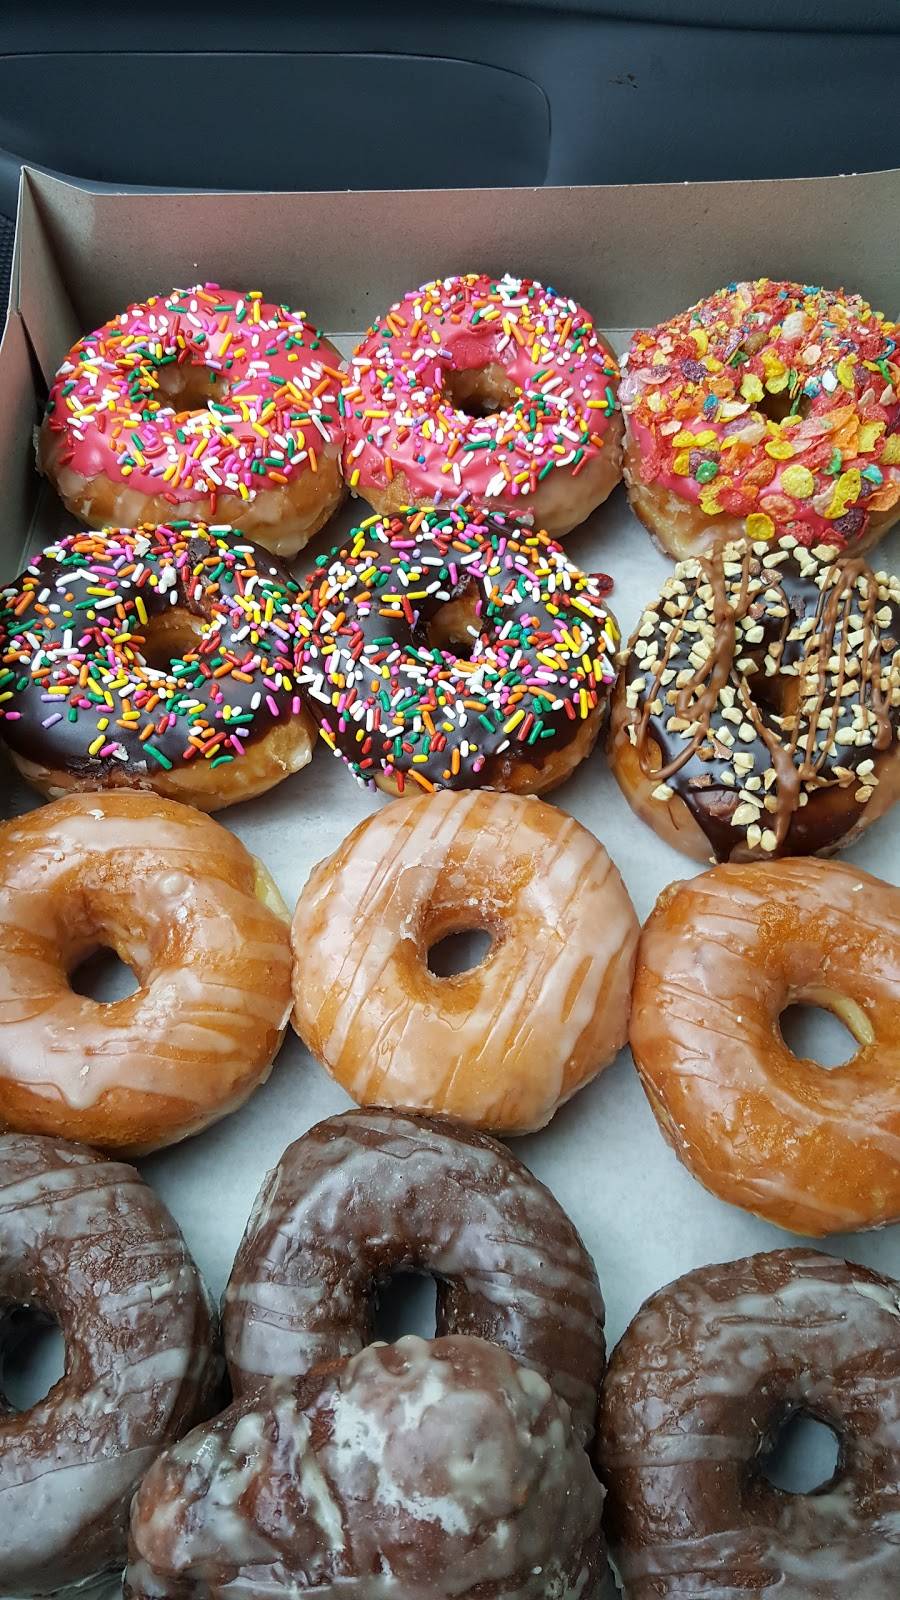 Donuts To Go | bakery | 1414 W 1st St, Sanford, FL 32779, USA | 4078782856 OR +1 407-878-2856